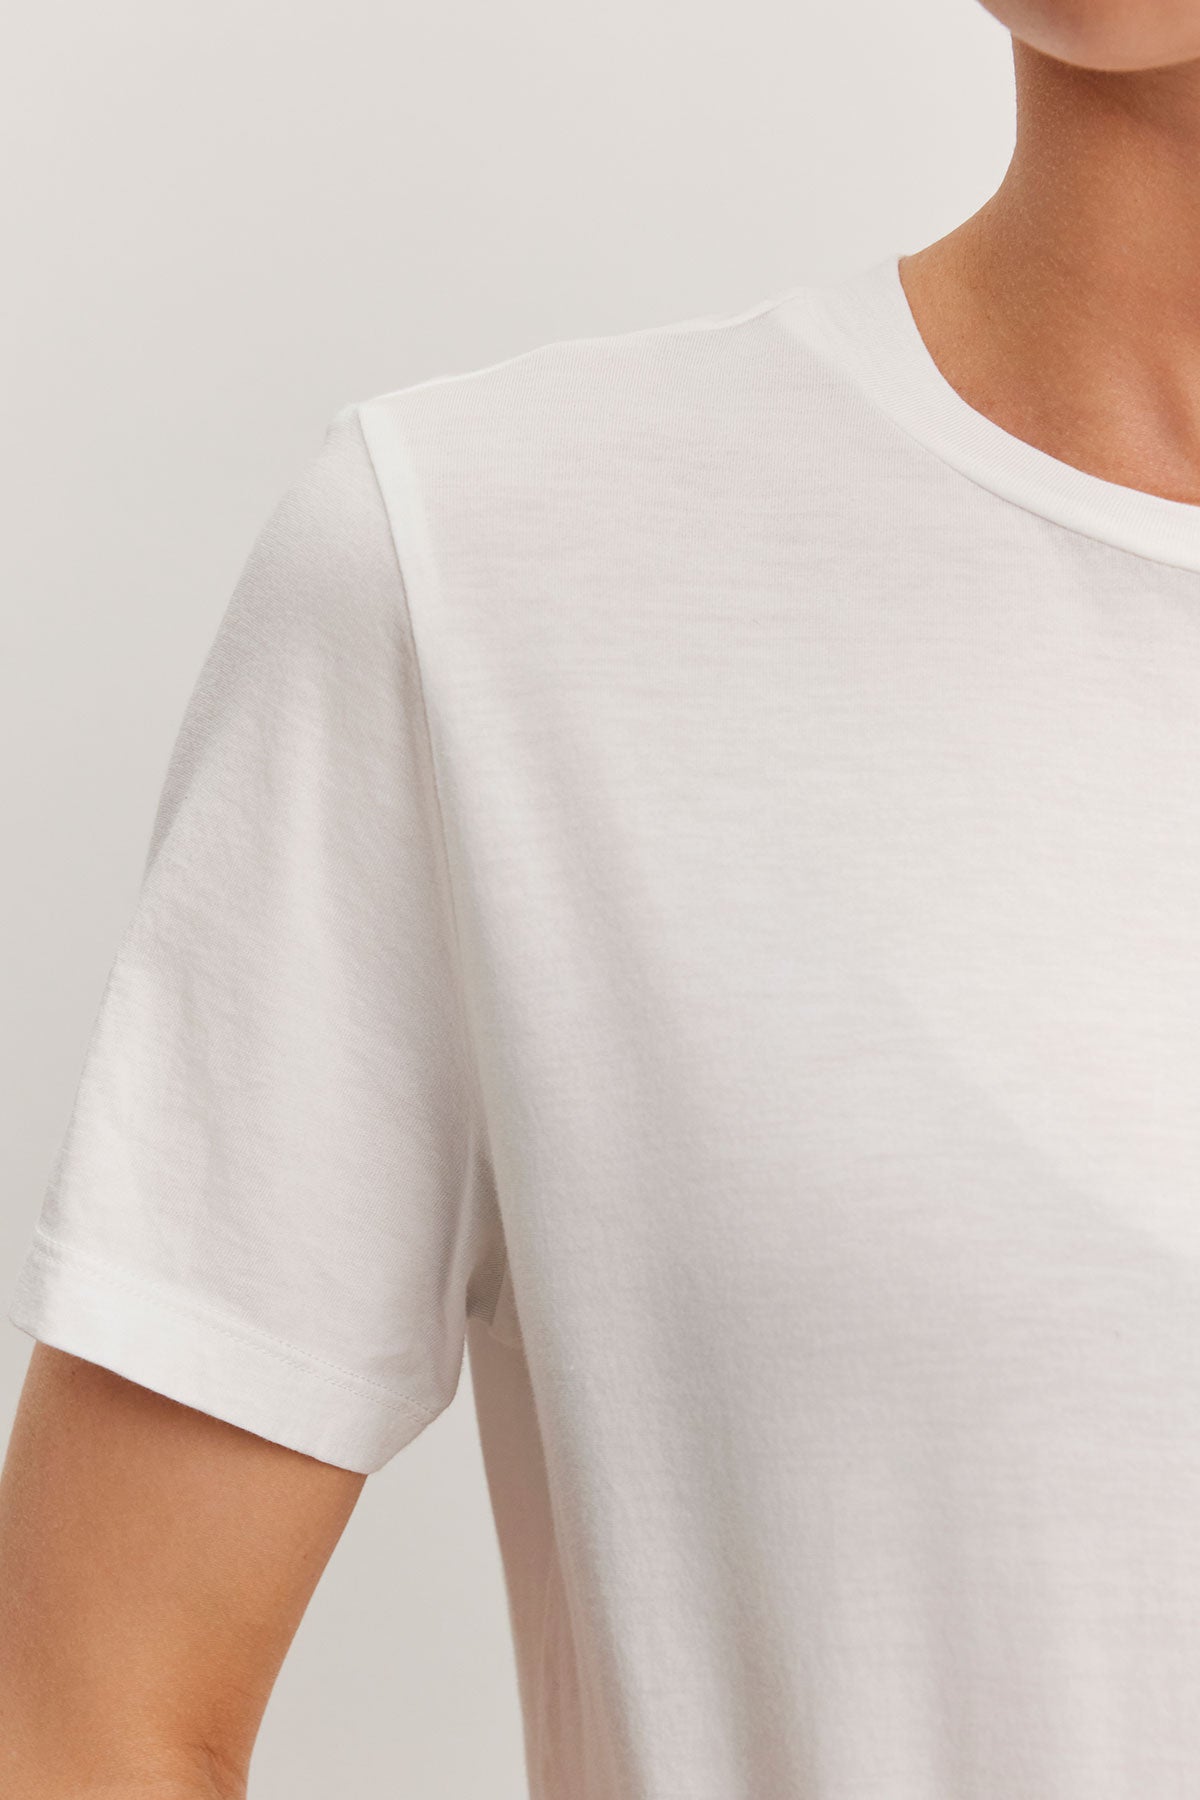   Close-up of a person wearing a Velvet by Graham & Spencer RYAN TEE in plain white, relaxed fit, focusing on the shoulder and sleeve area. The background is neutral. 